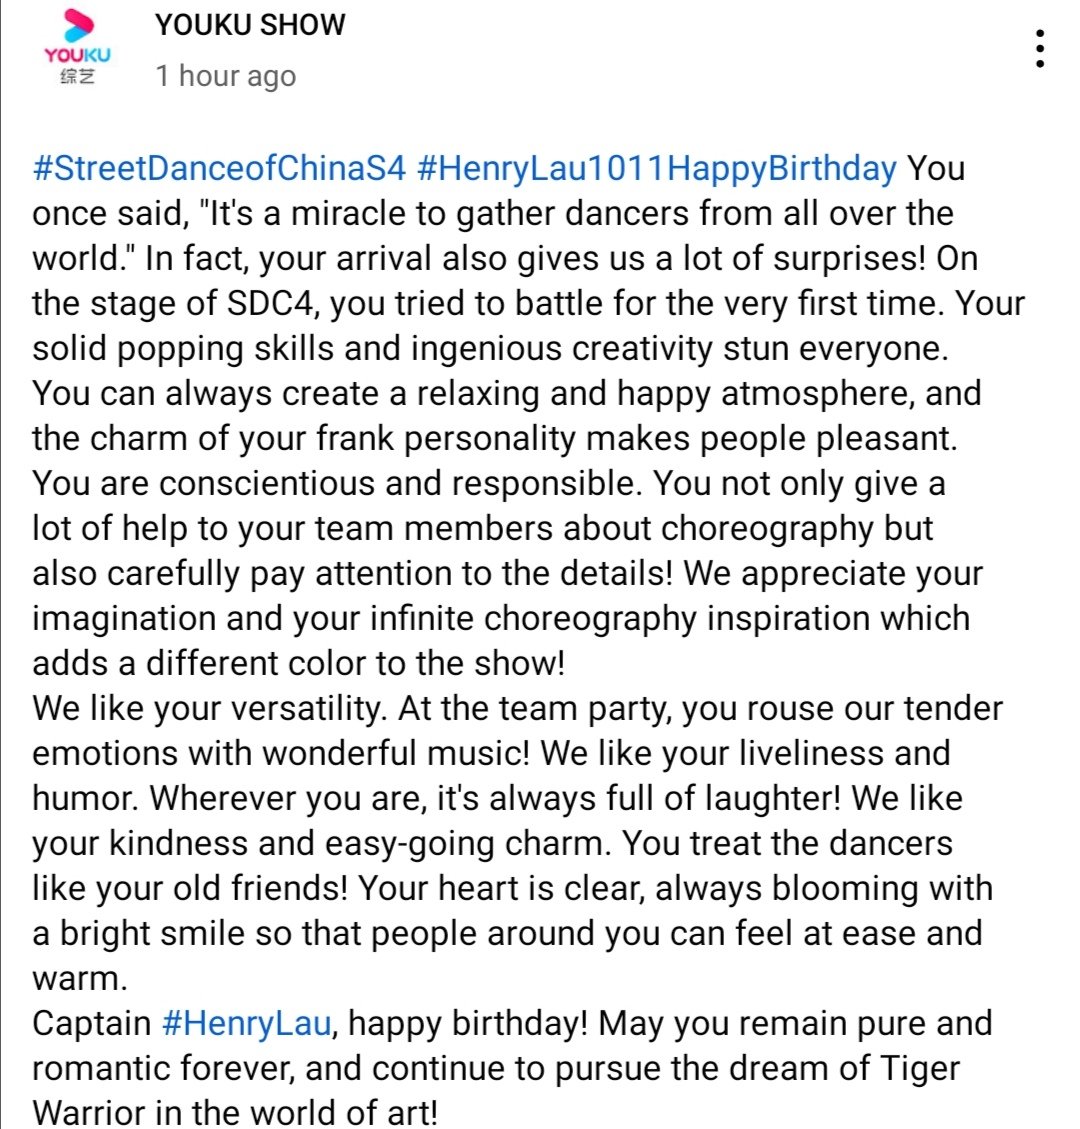 A very nice birthday message of YOUKU to our Captain Henry Lau..
Happy birthday    